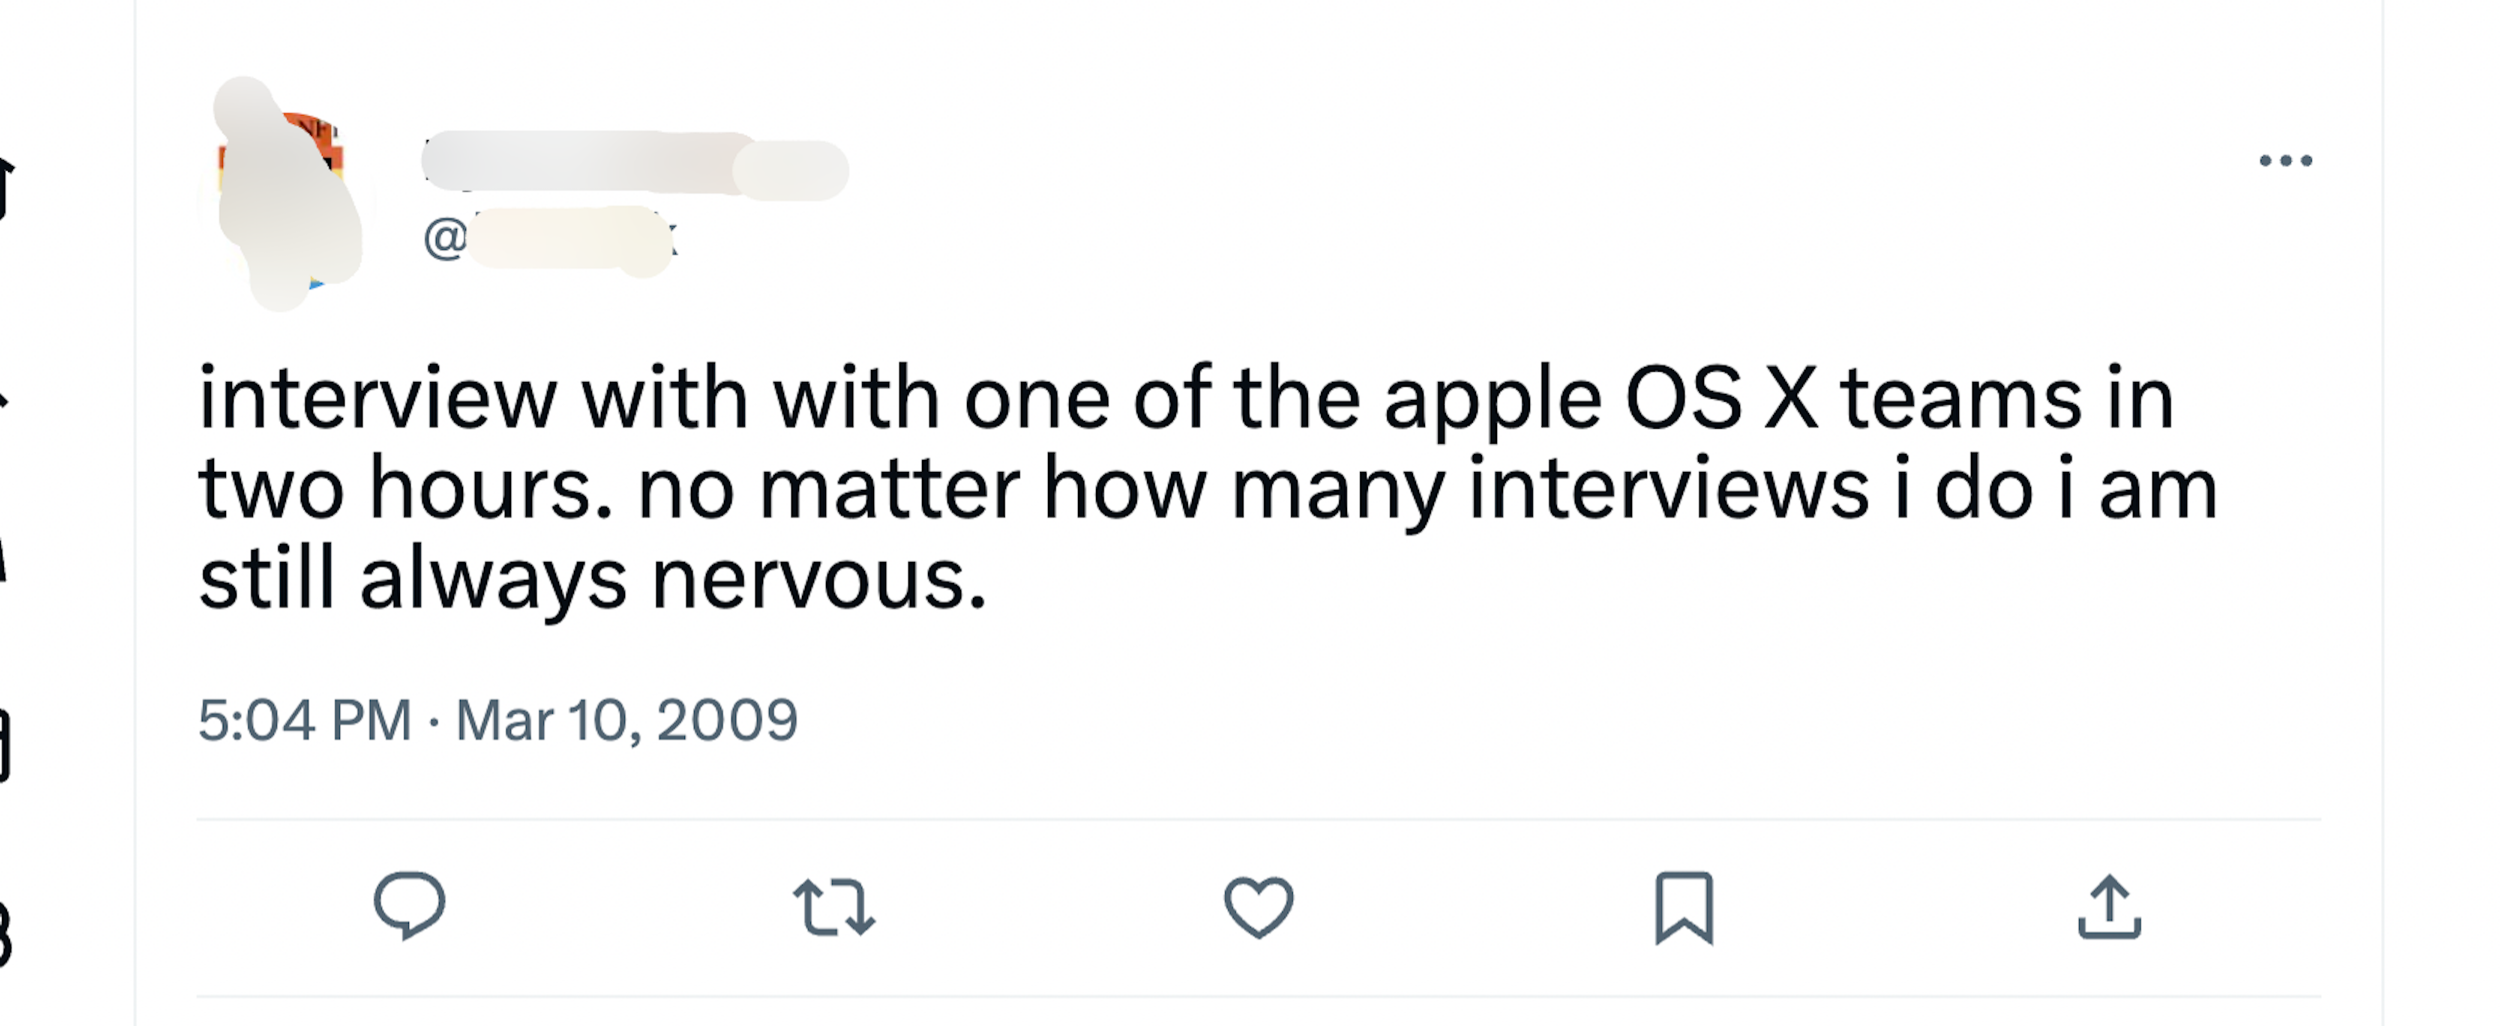 Pic of Twitter user in 2009 expressing nervousness about an upcoming technical interview with "one of the Apple OS X teams."